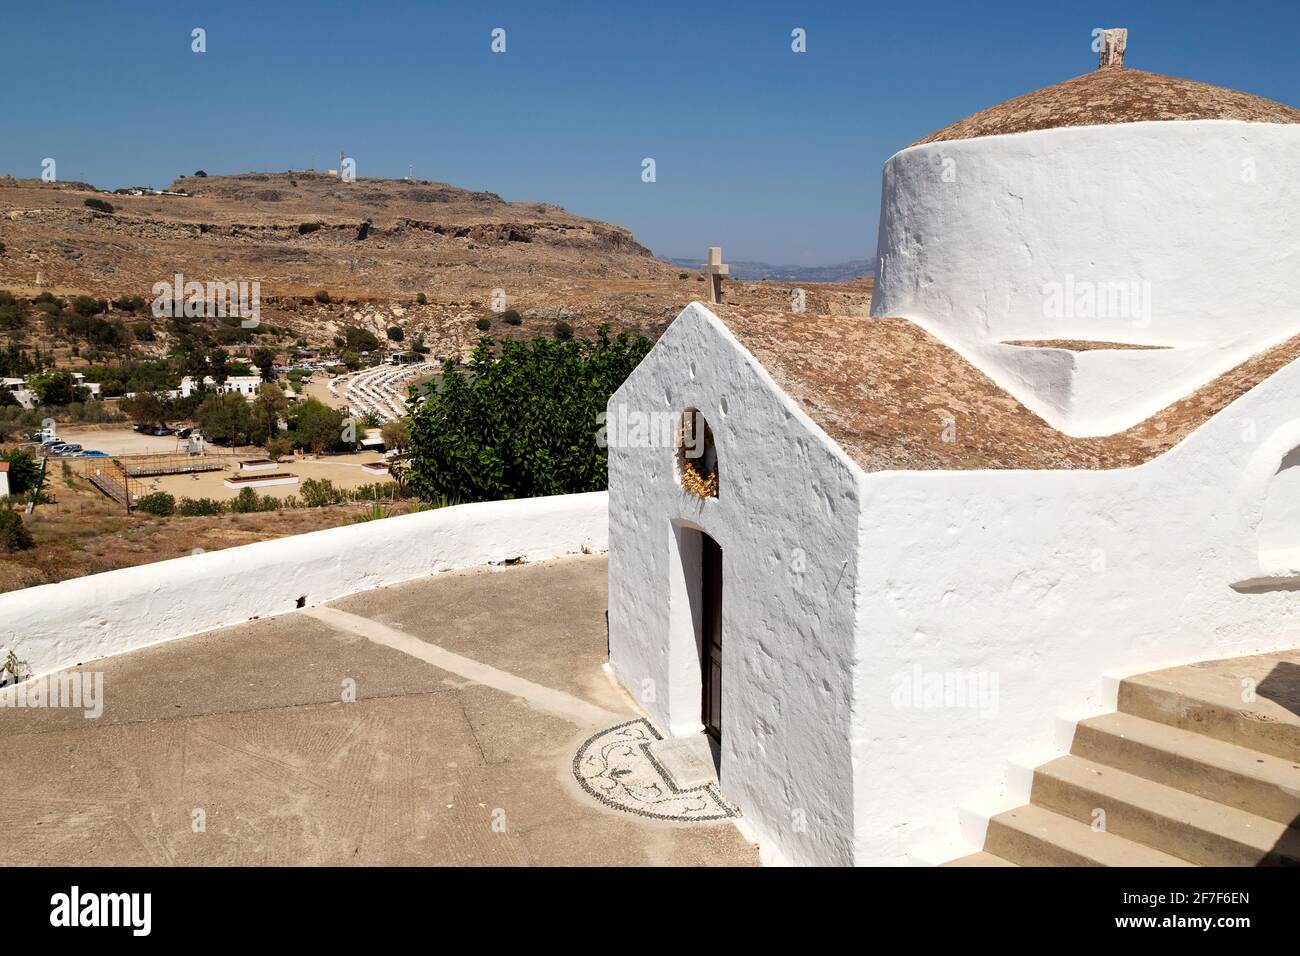 The Chapel of Saint George Pachymachiotis in Lindos on Rhodes, Greece. The white Greek Orthodox chapel is seen under a clear blue sky. Stock Photo